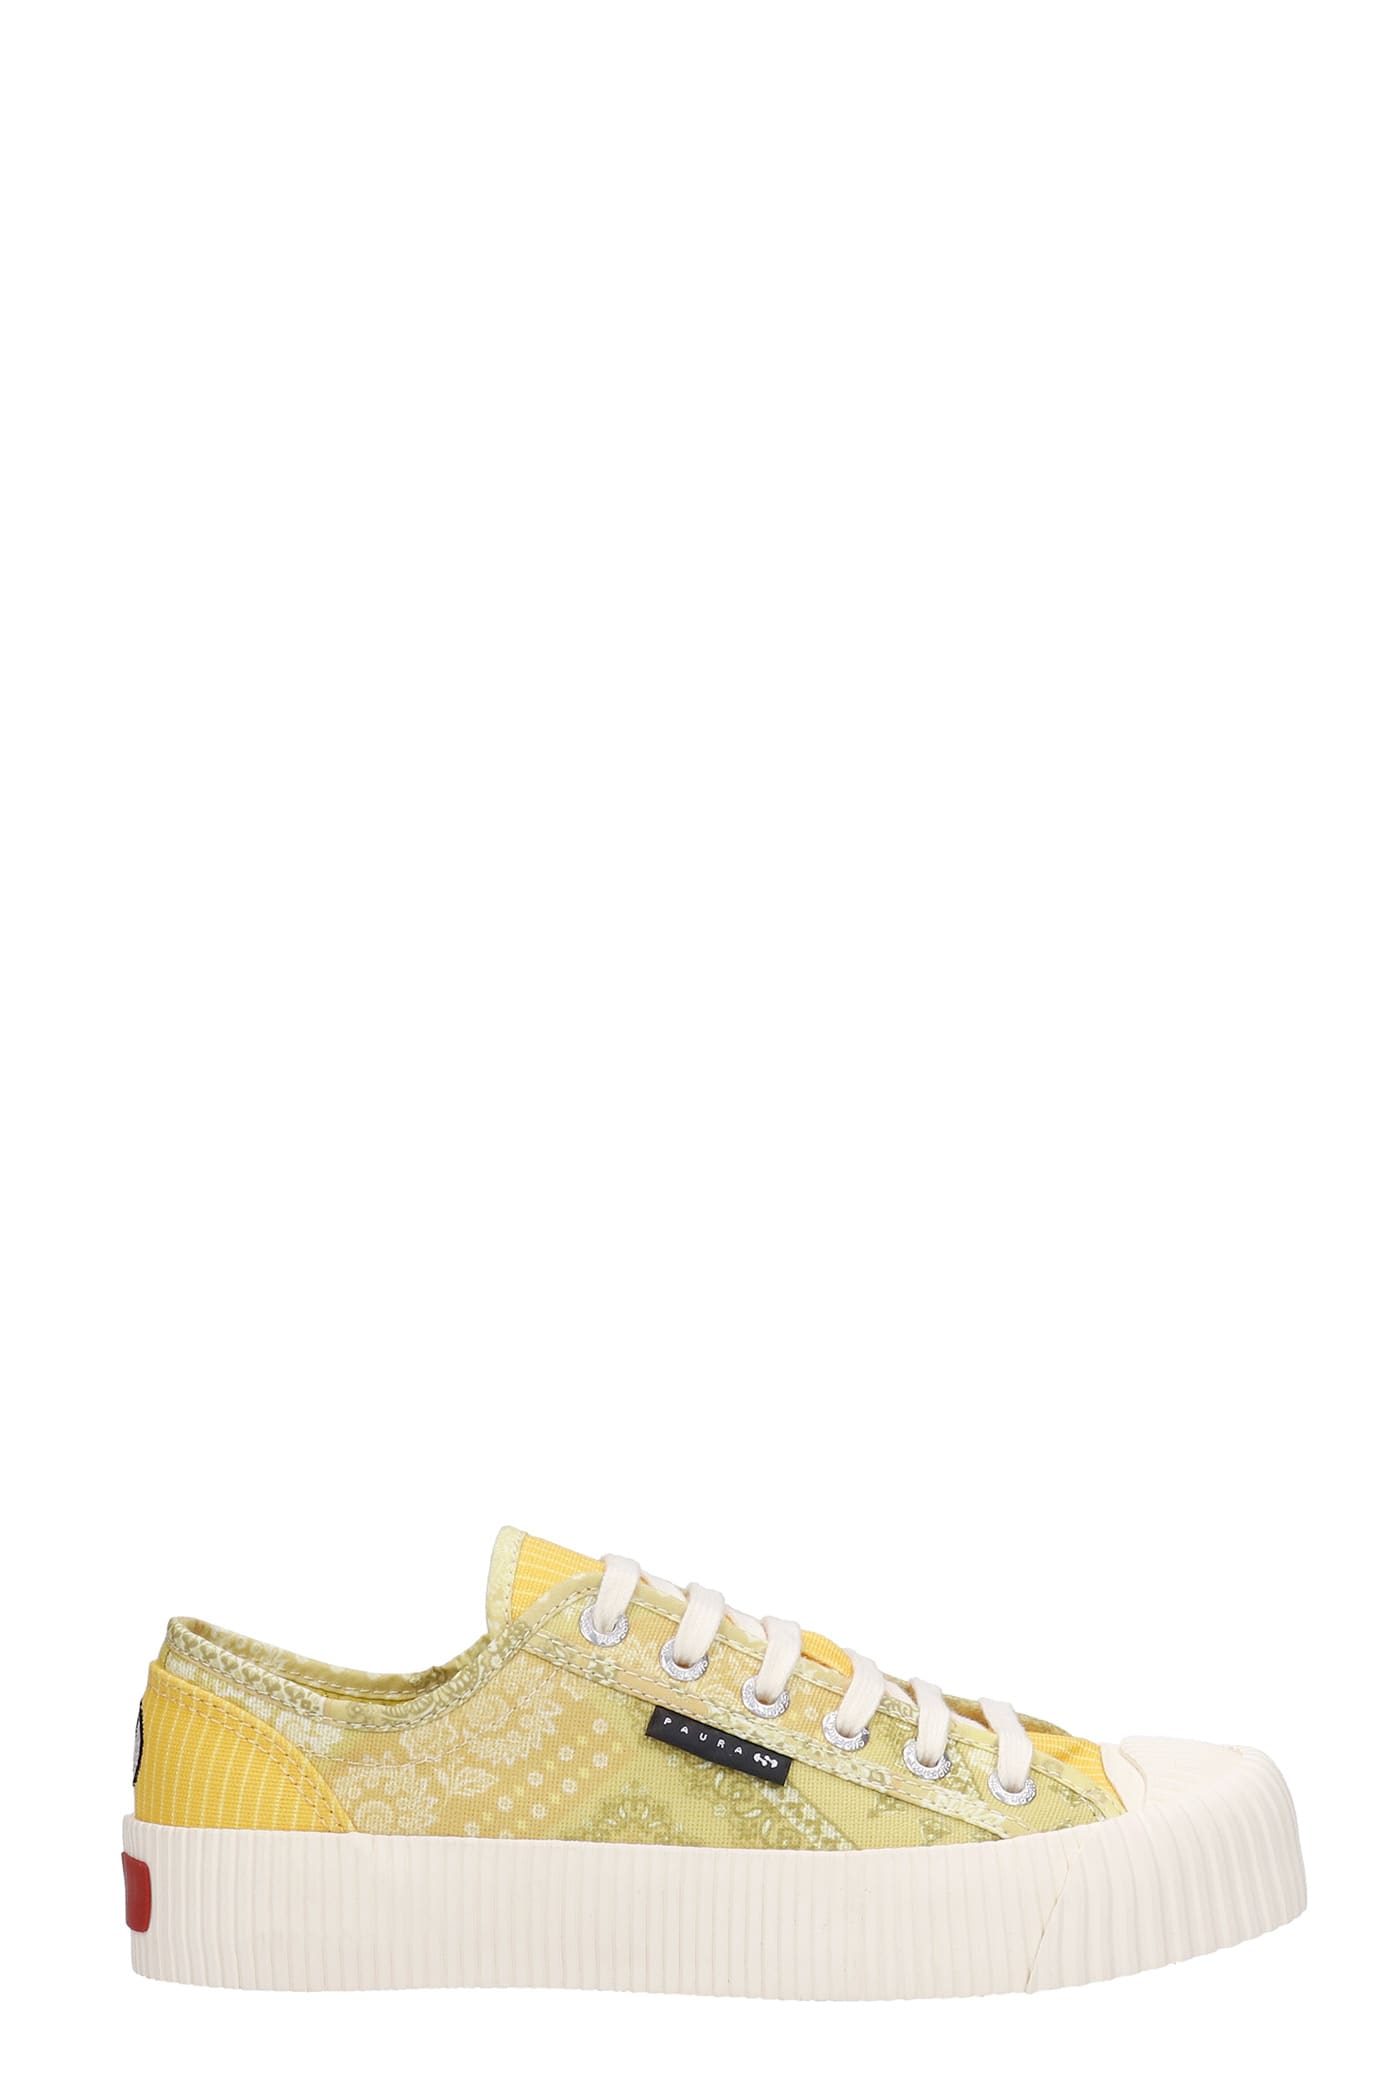 Superga Sneakers In Yellow Canvas